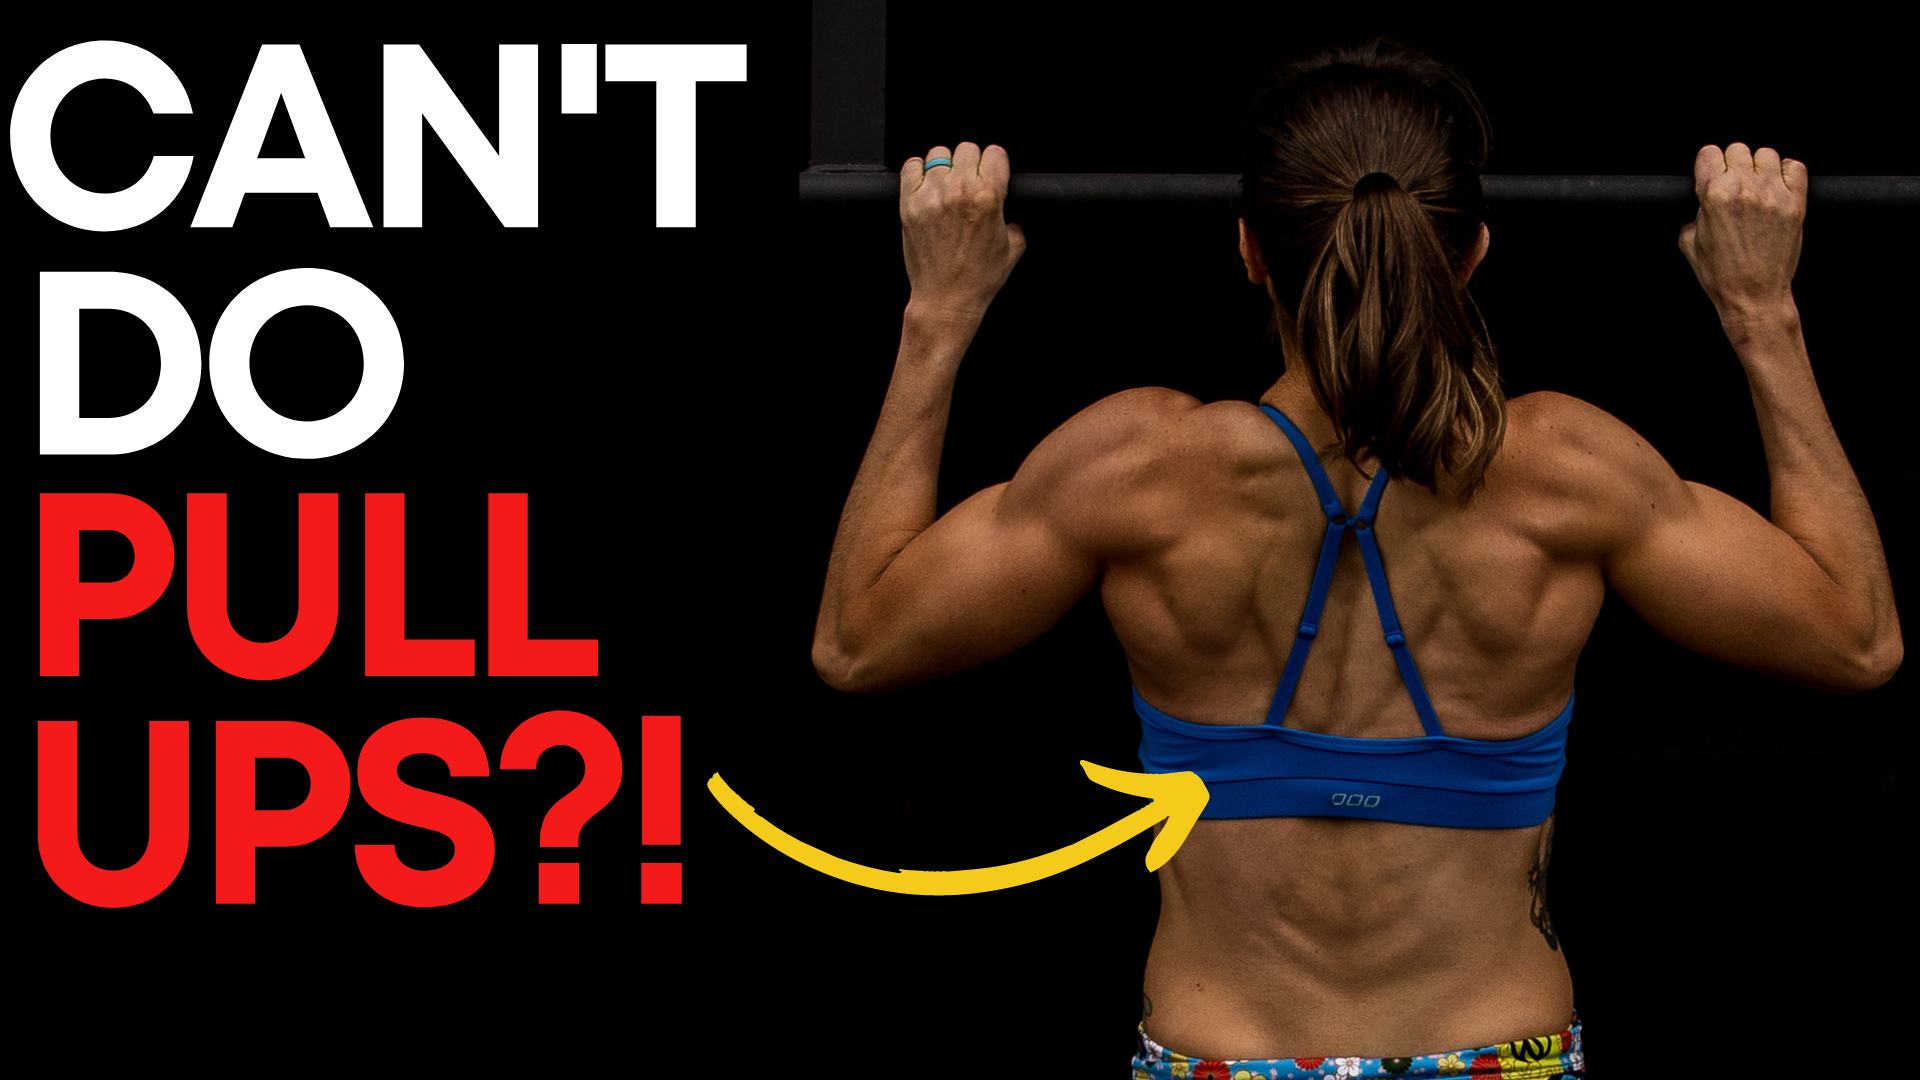 Improve your pull ups